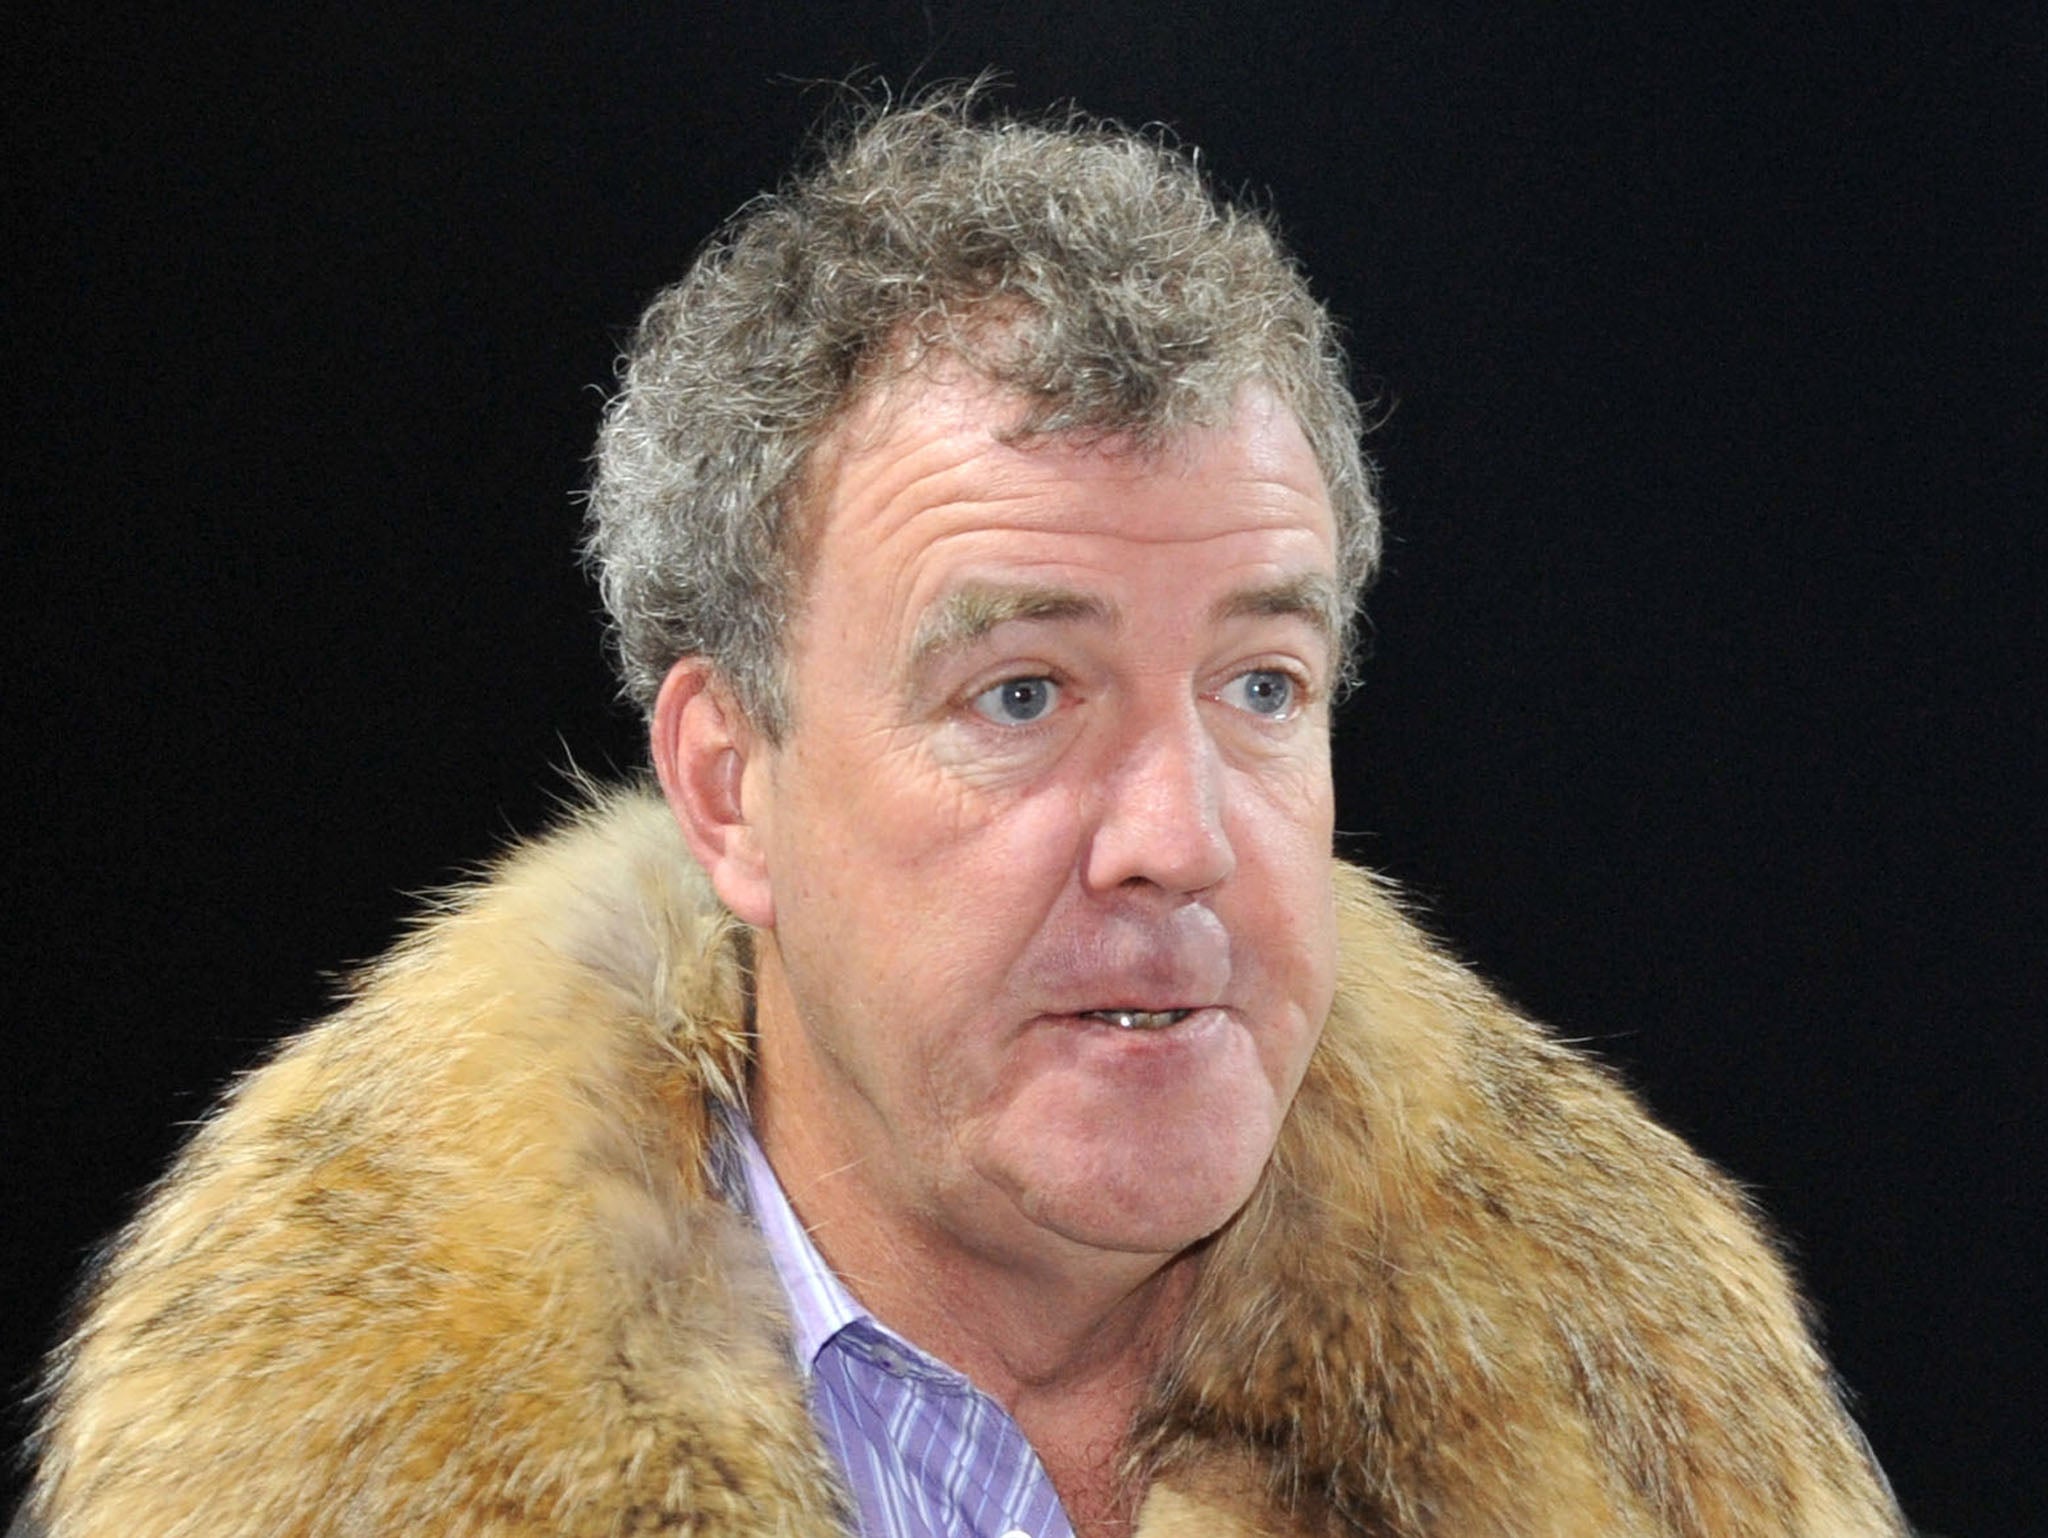 Jeremy Clarkson has been offered a bizarre role in a Russian comedy